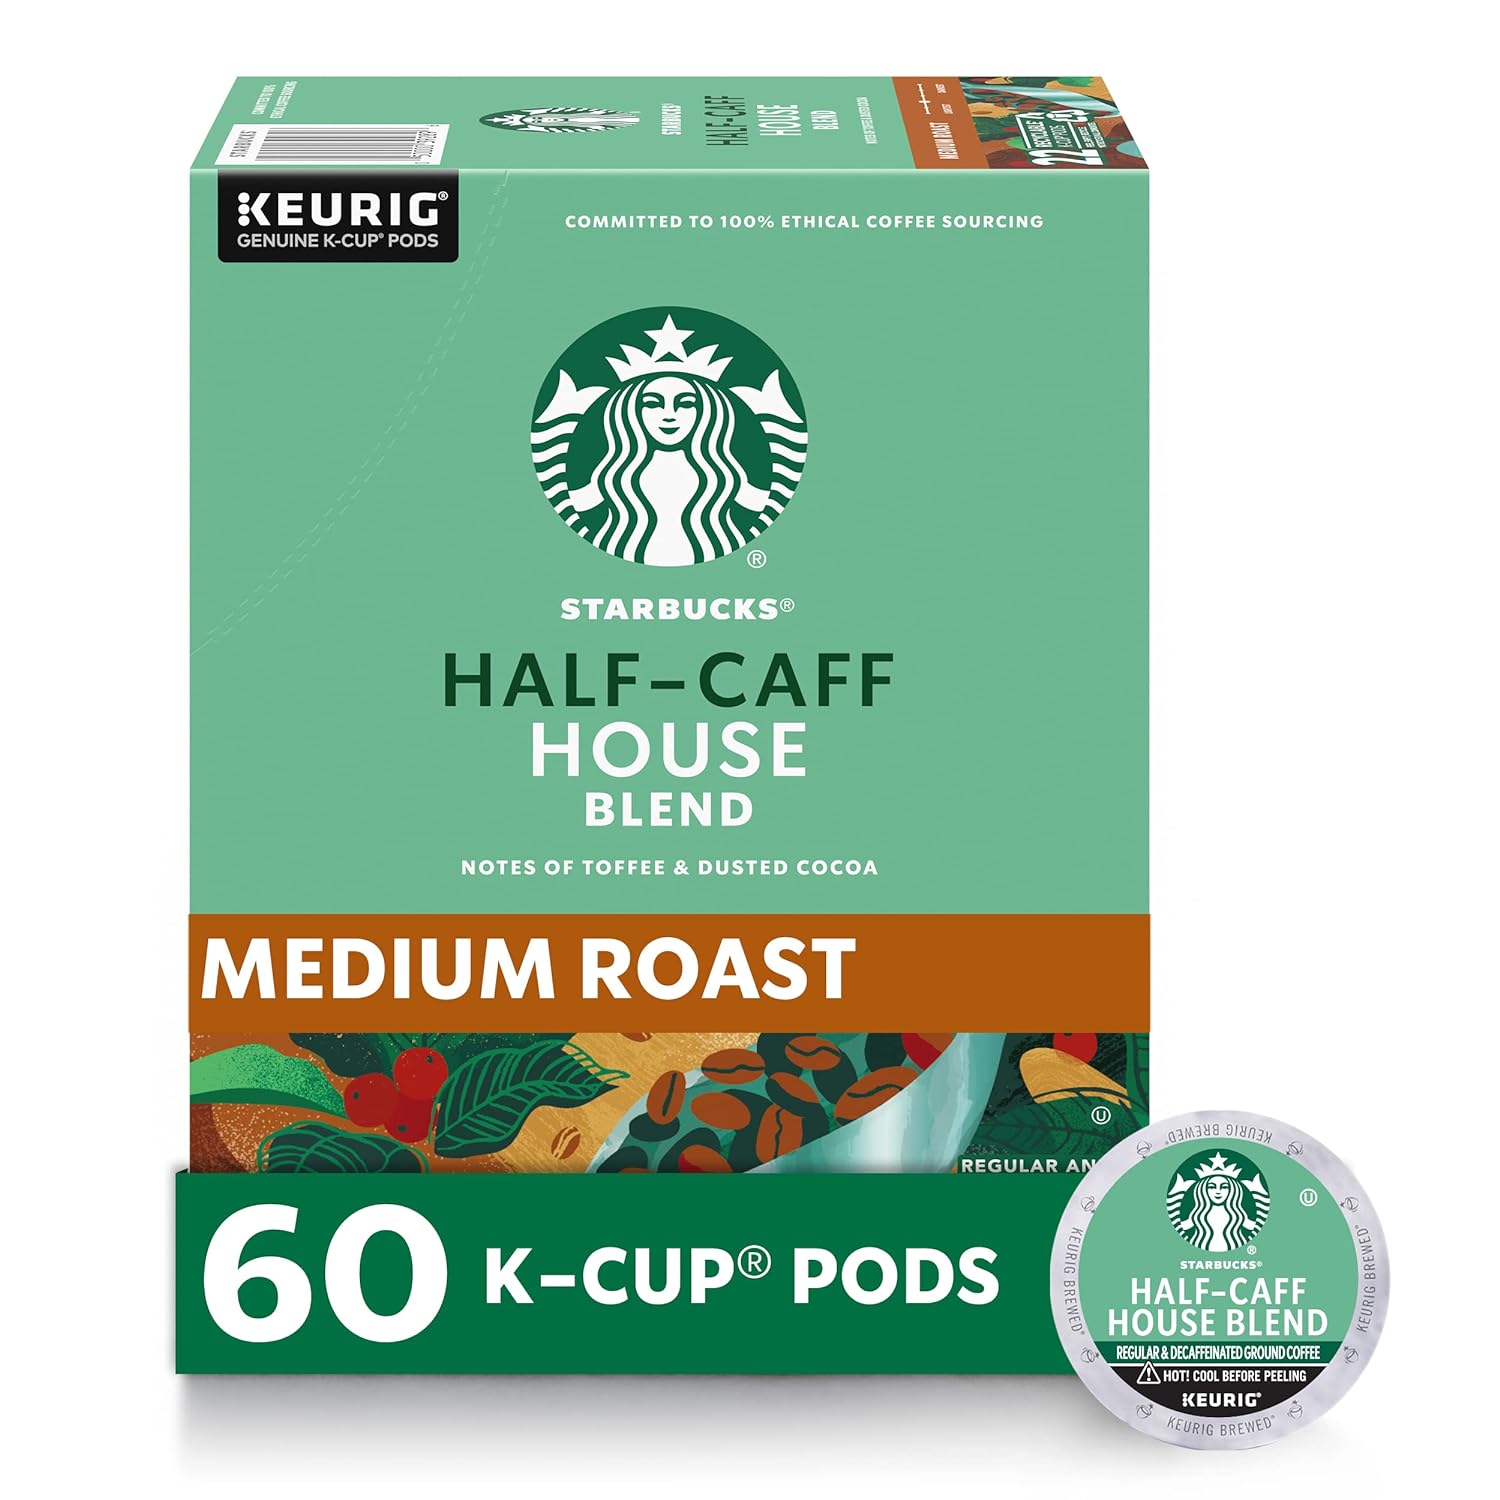 Starbucks K-Cup Coffee Pods, Medium Roast Coffee, Half-Caff House Blend For Keurig Brewers, 100% Arabica, 6 Boxes (60 Pods Total)